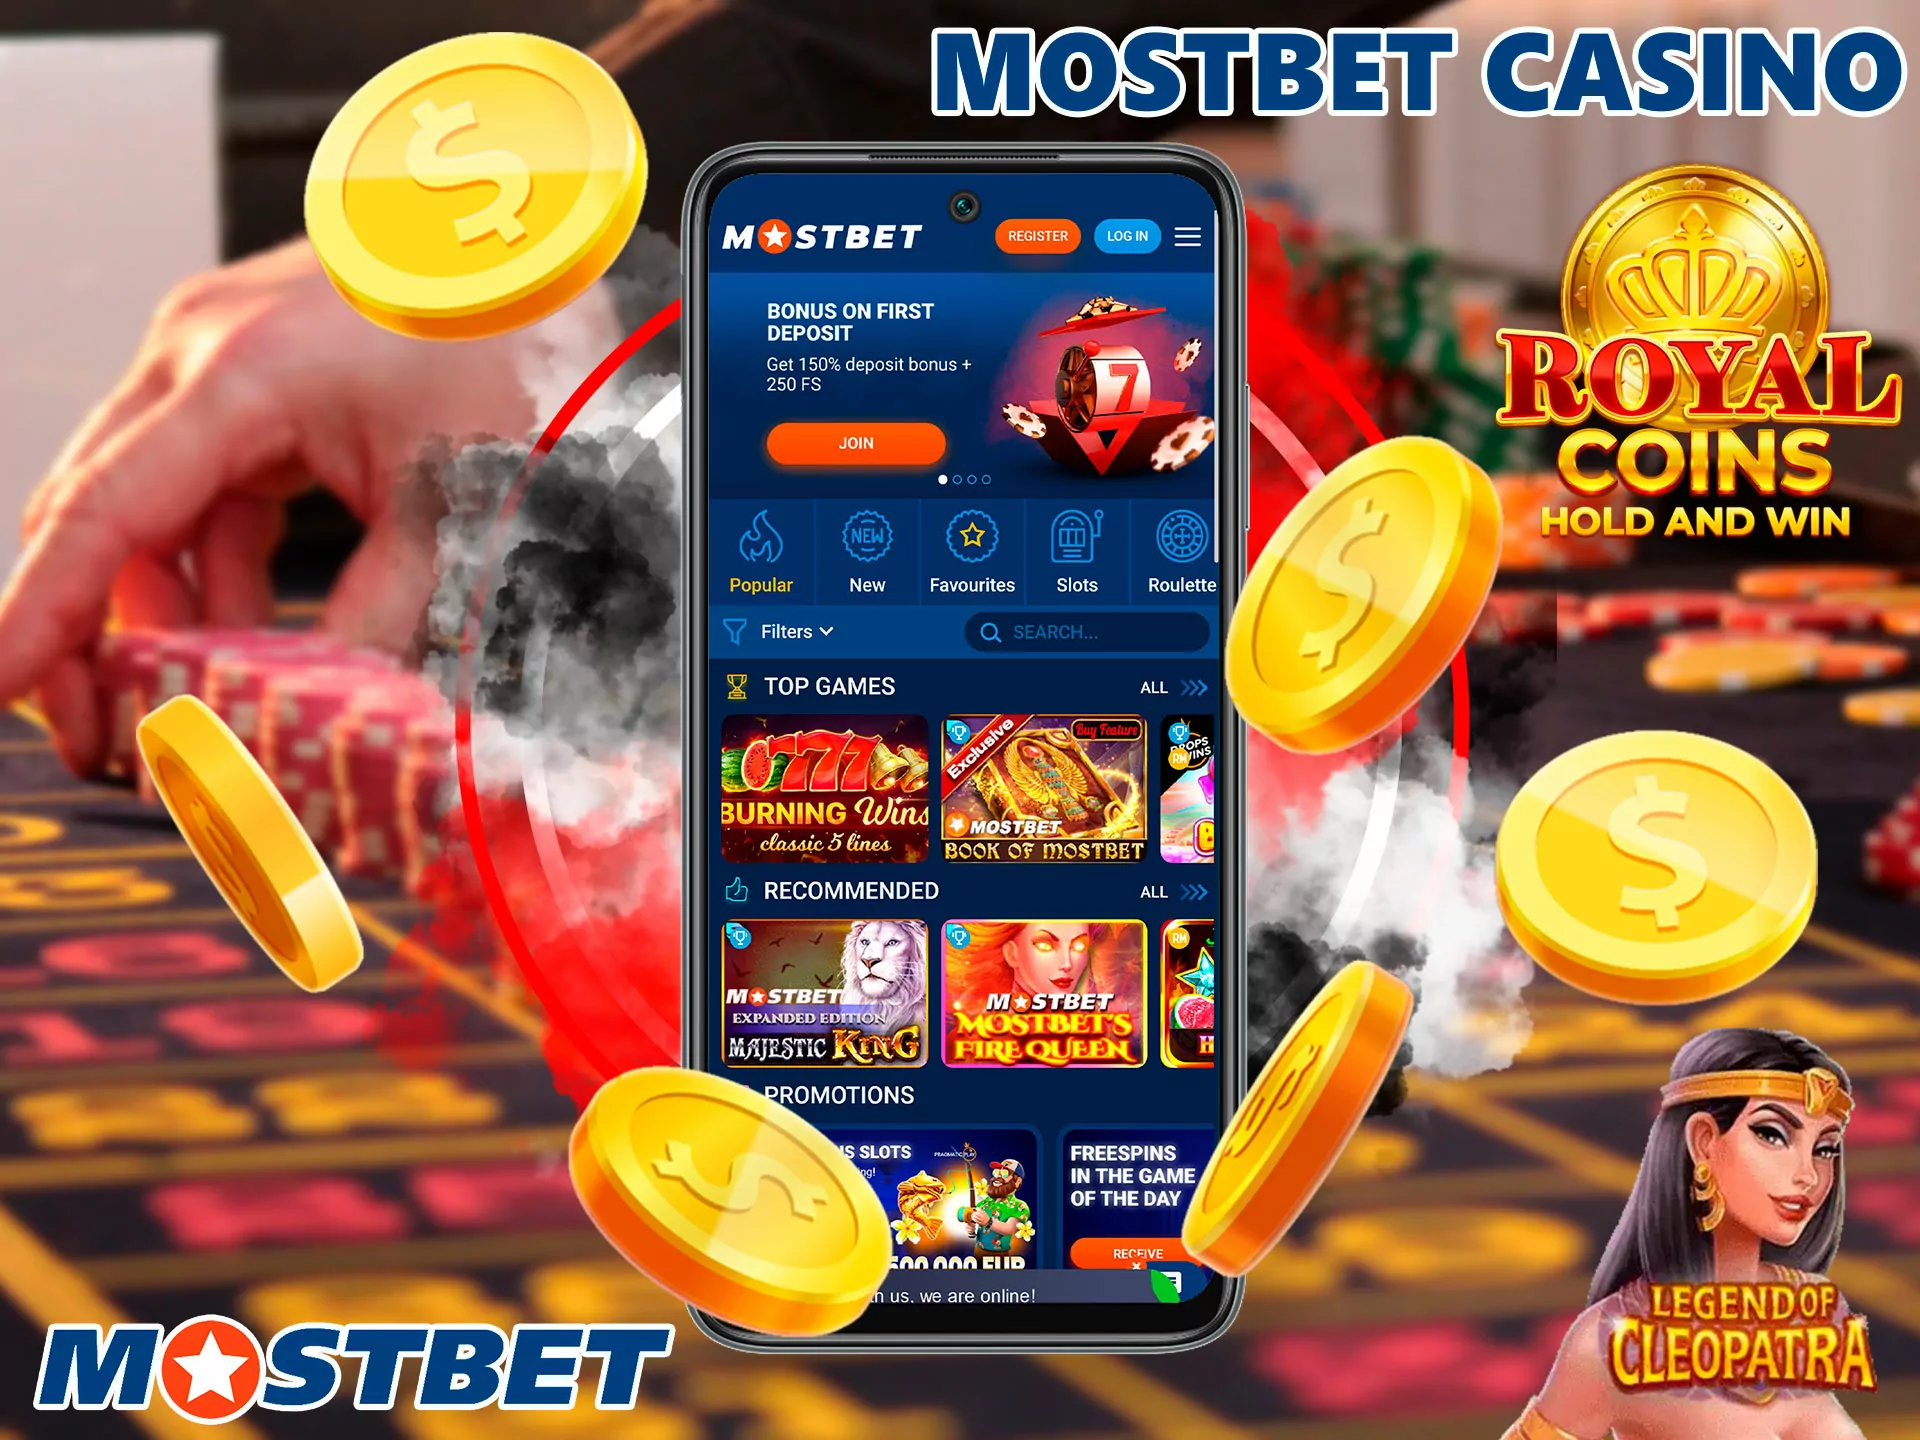 This section is represented by a separate tab on the main page, you will find many games, slot machines from various providers, roulette, card games, lotteries, virtual games and much more, all this is waiting for you.